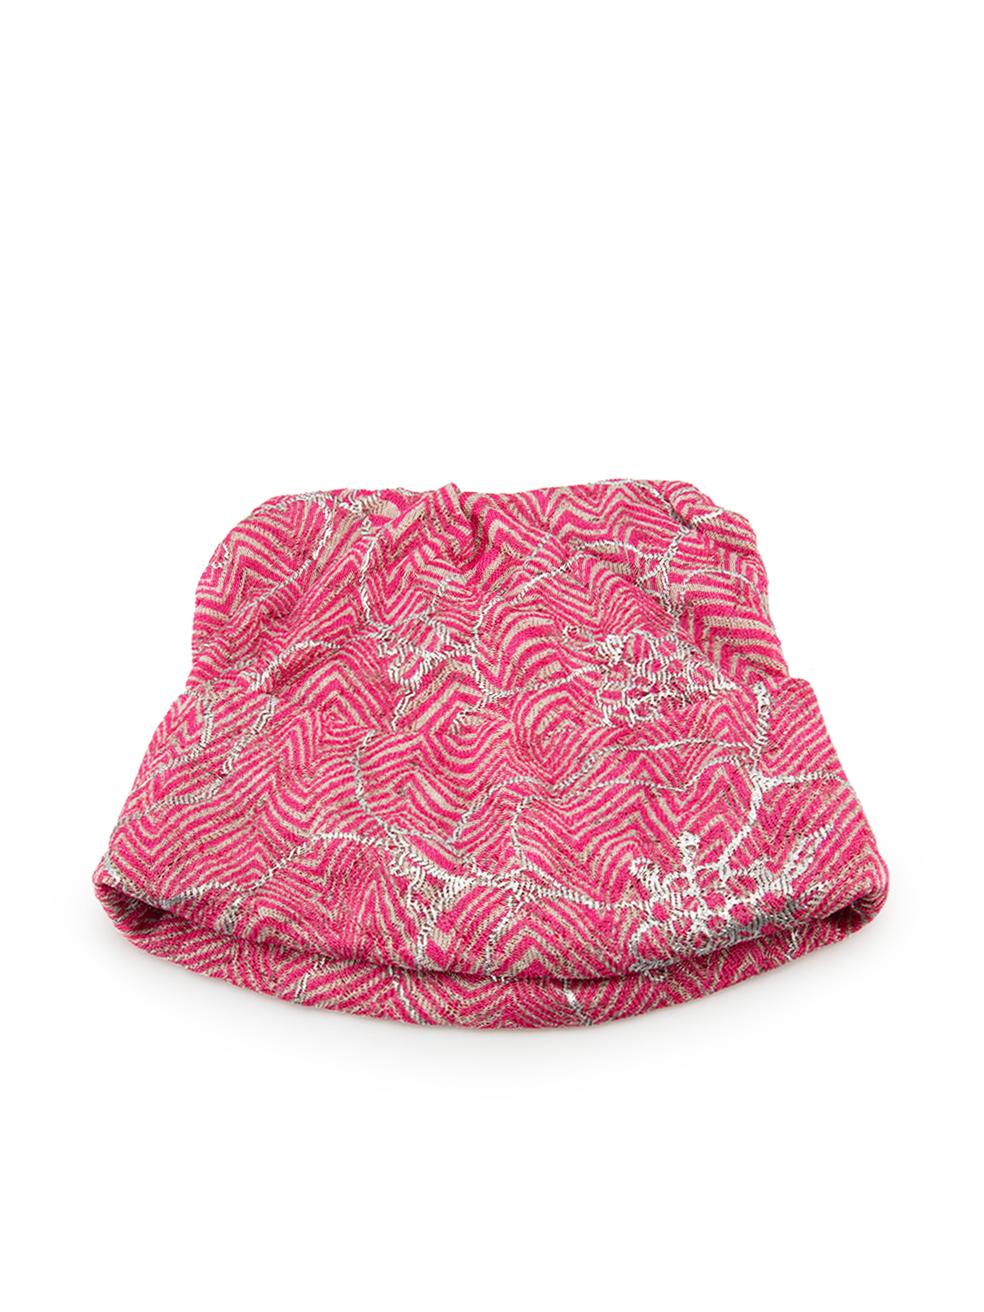 Missoni Pink Knitted Folded Edge Hat In Good Condition In London, GB